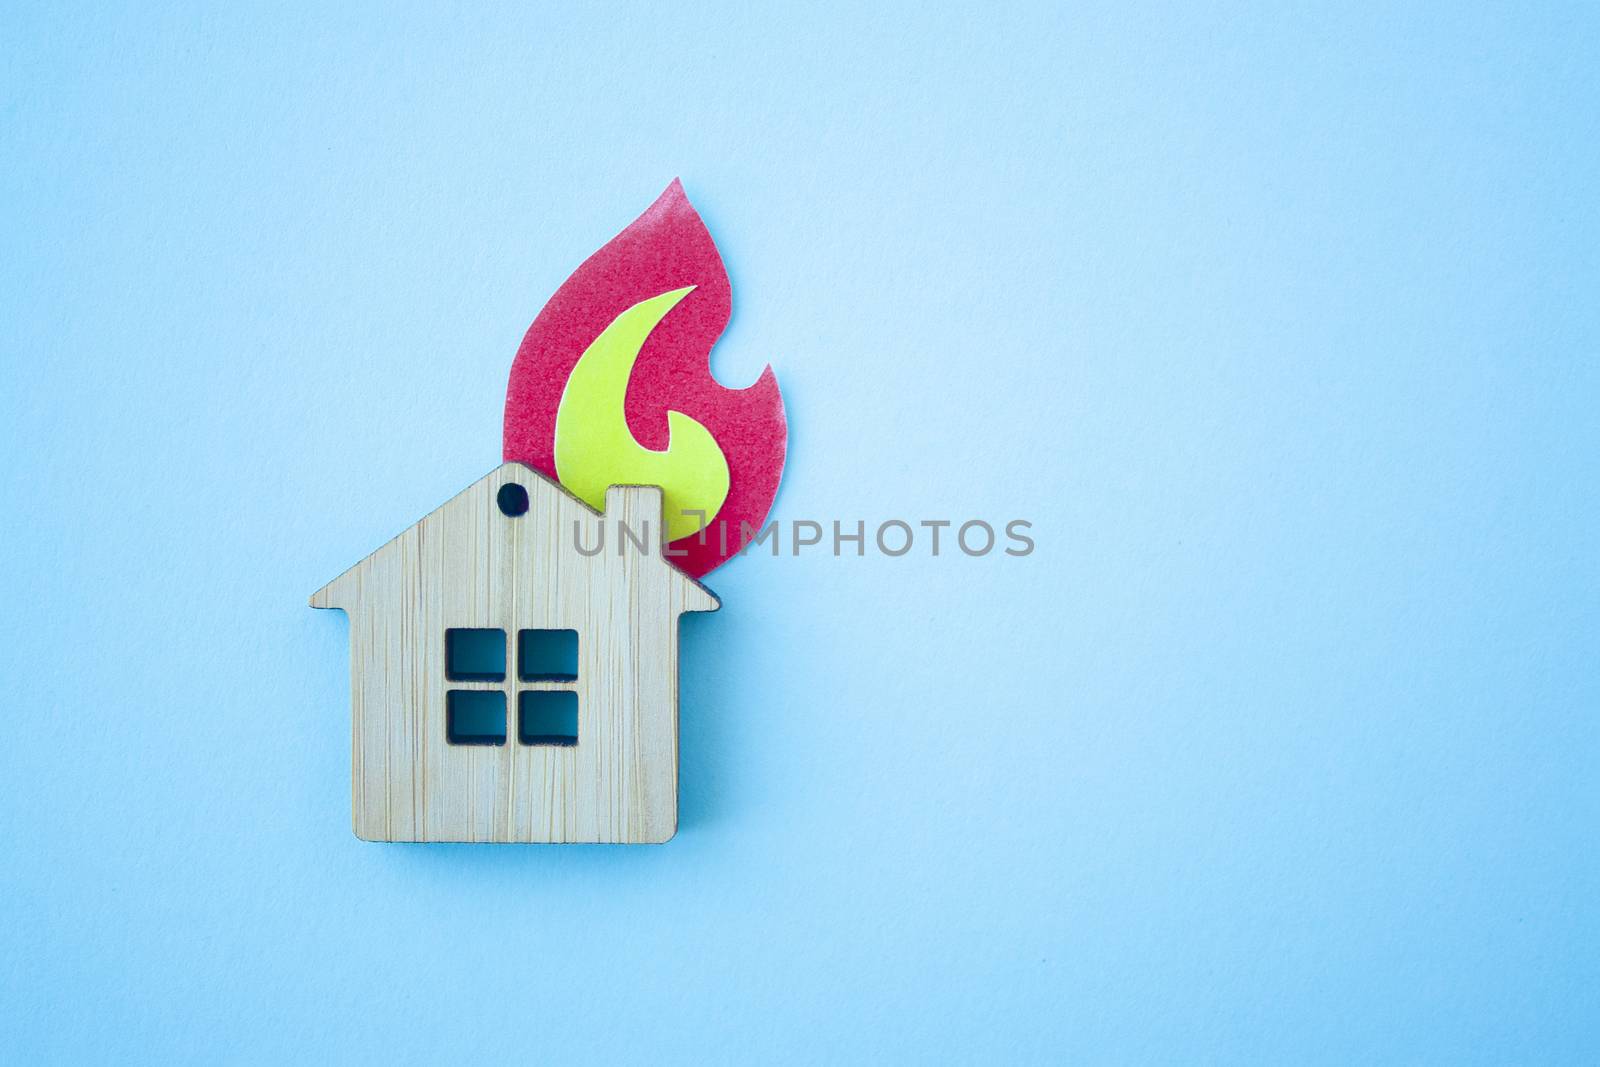 Fire house, insurance and mortgage concept. Small wooden house toy and paper fire shape on blue background top view with copy space